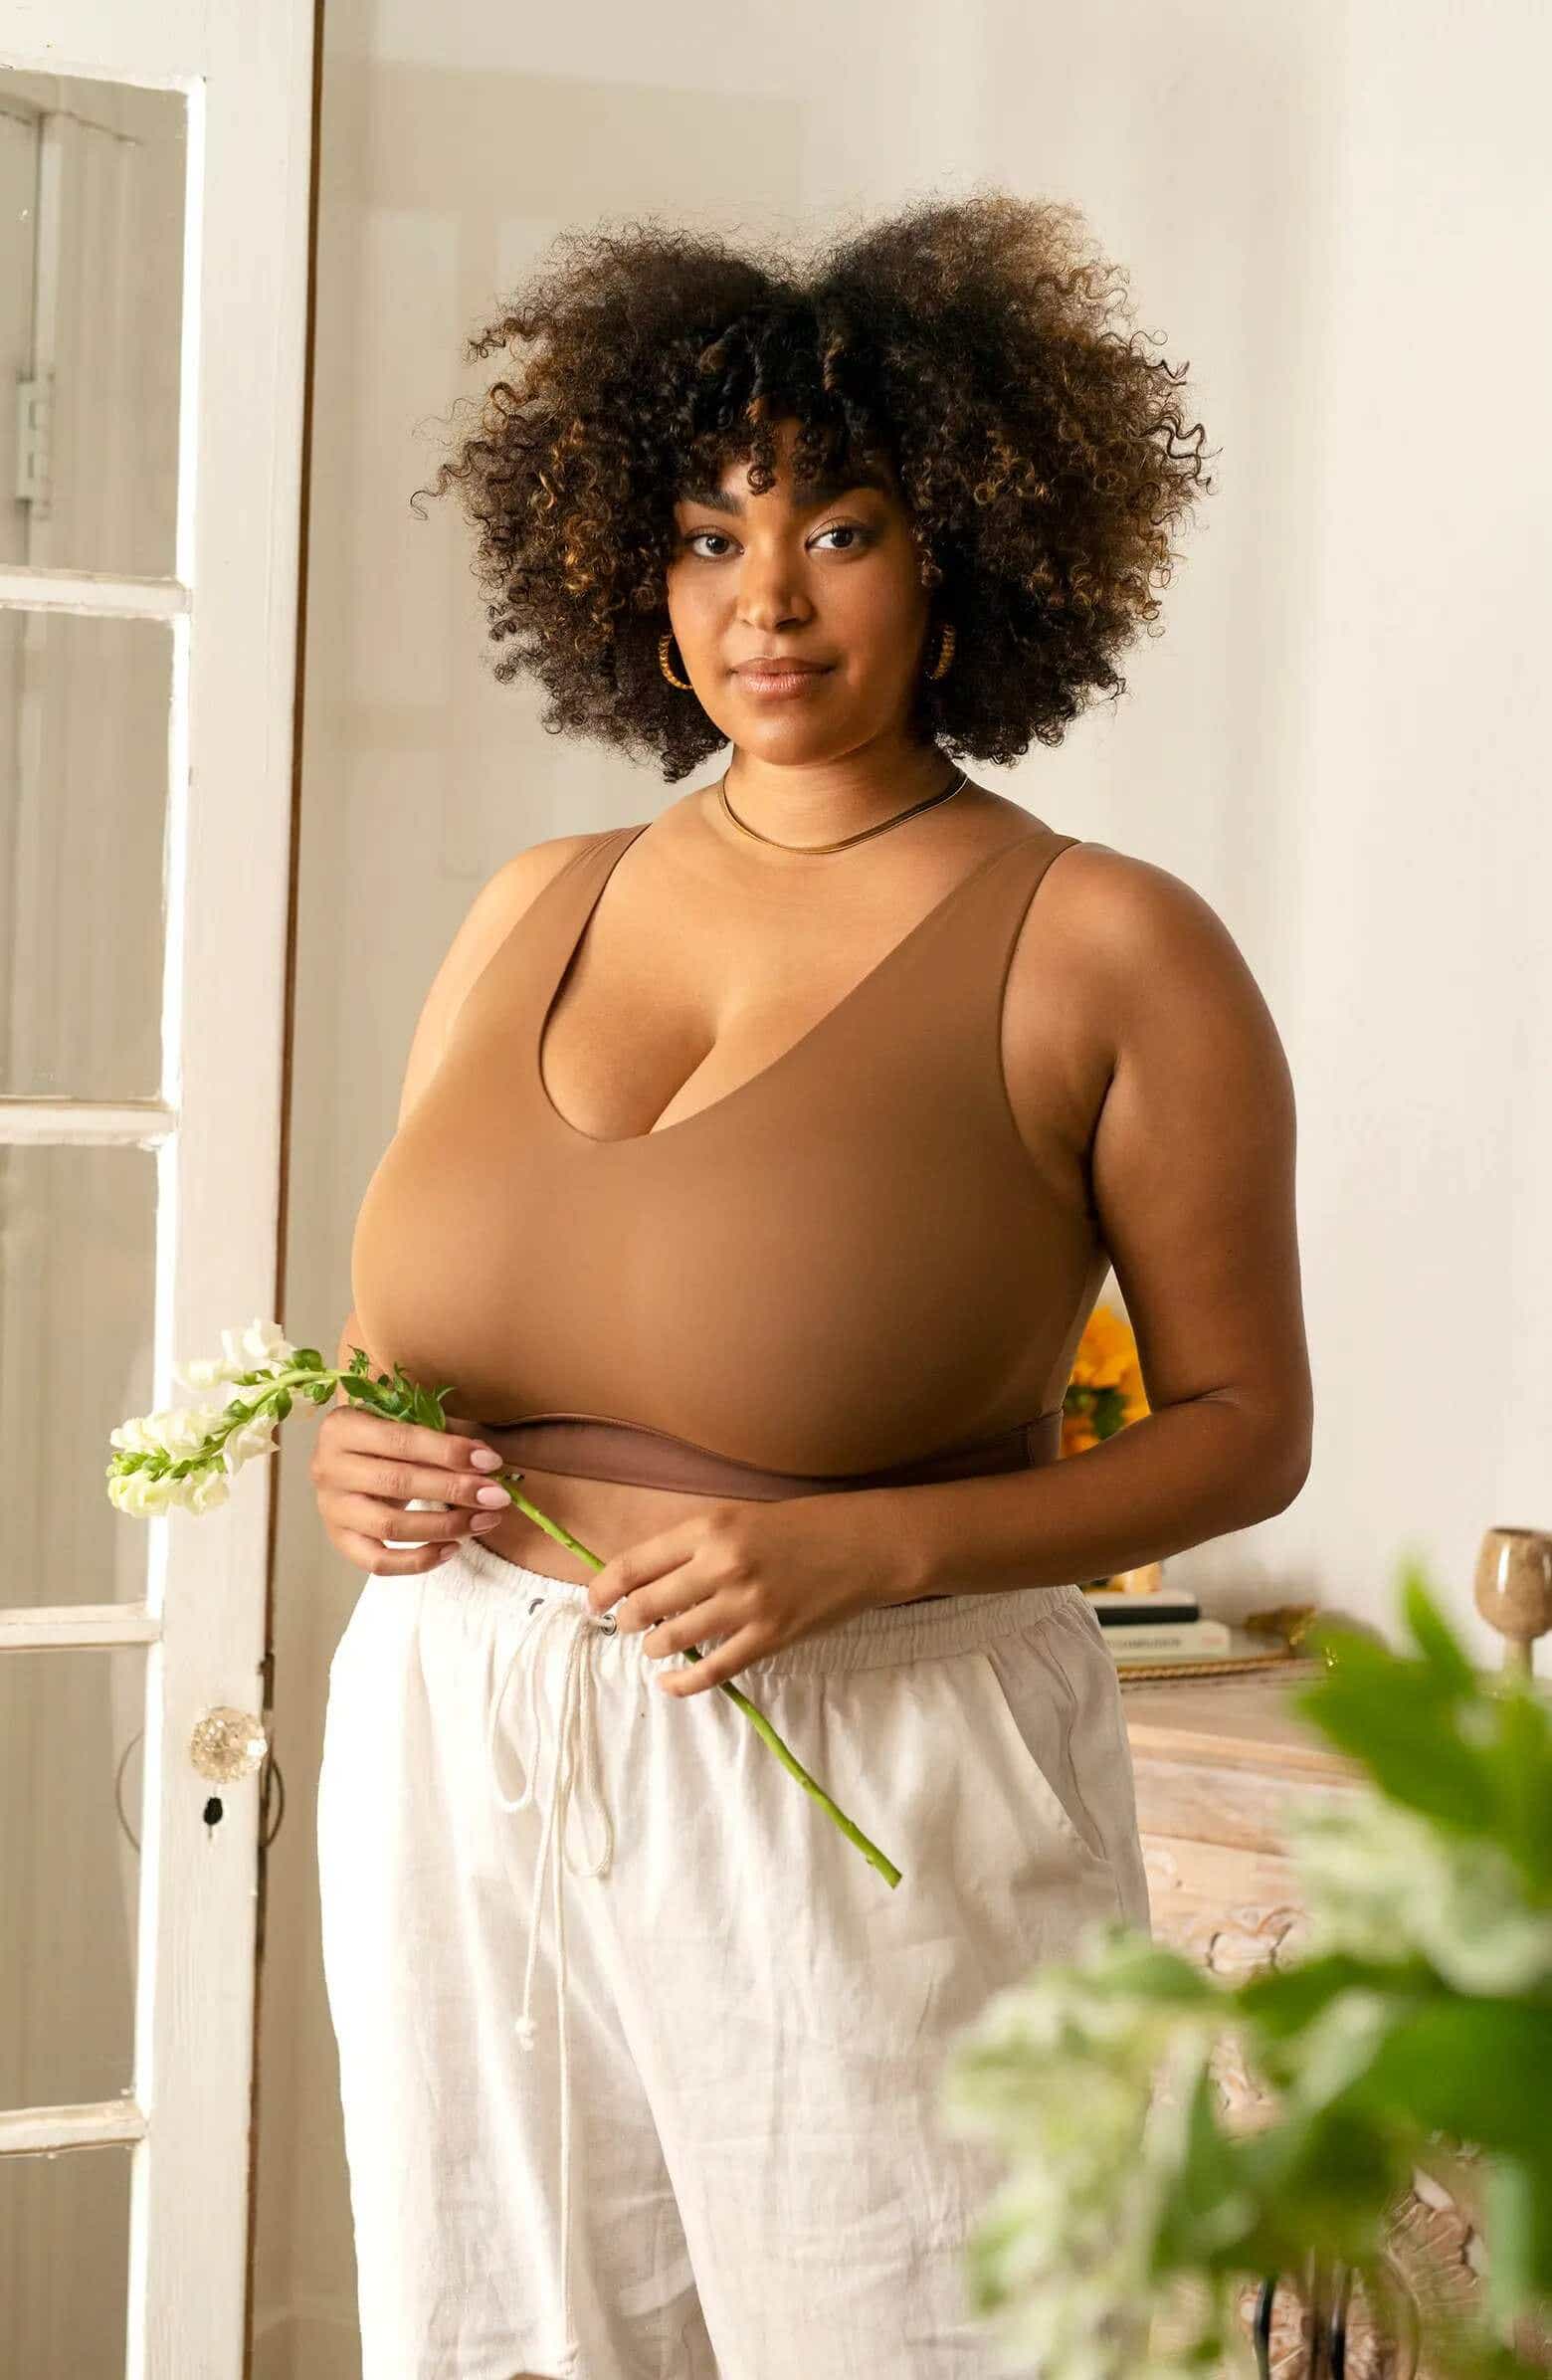 dean felton recommends mature large breasted women pic